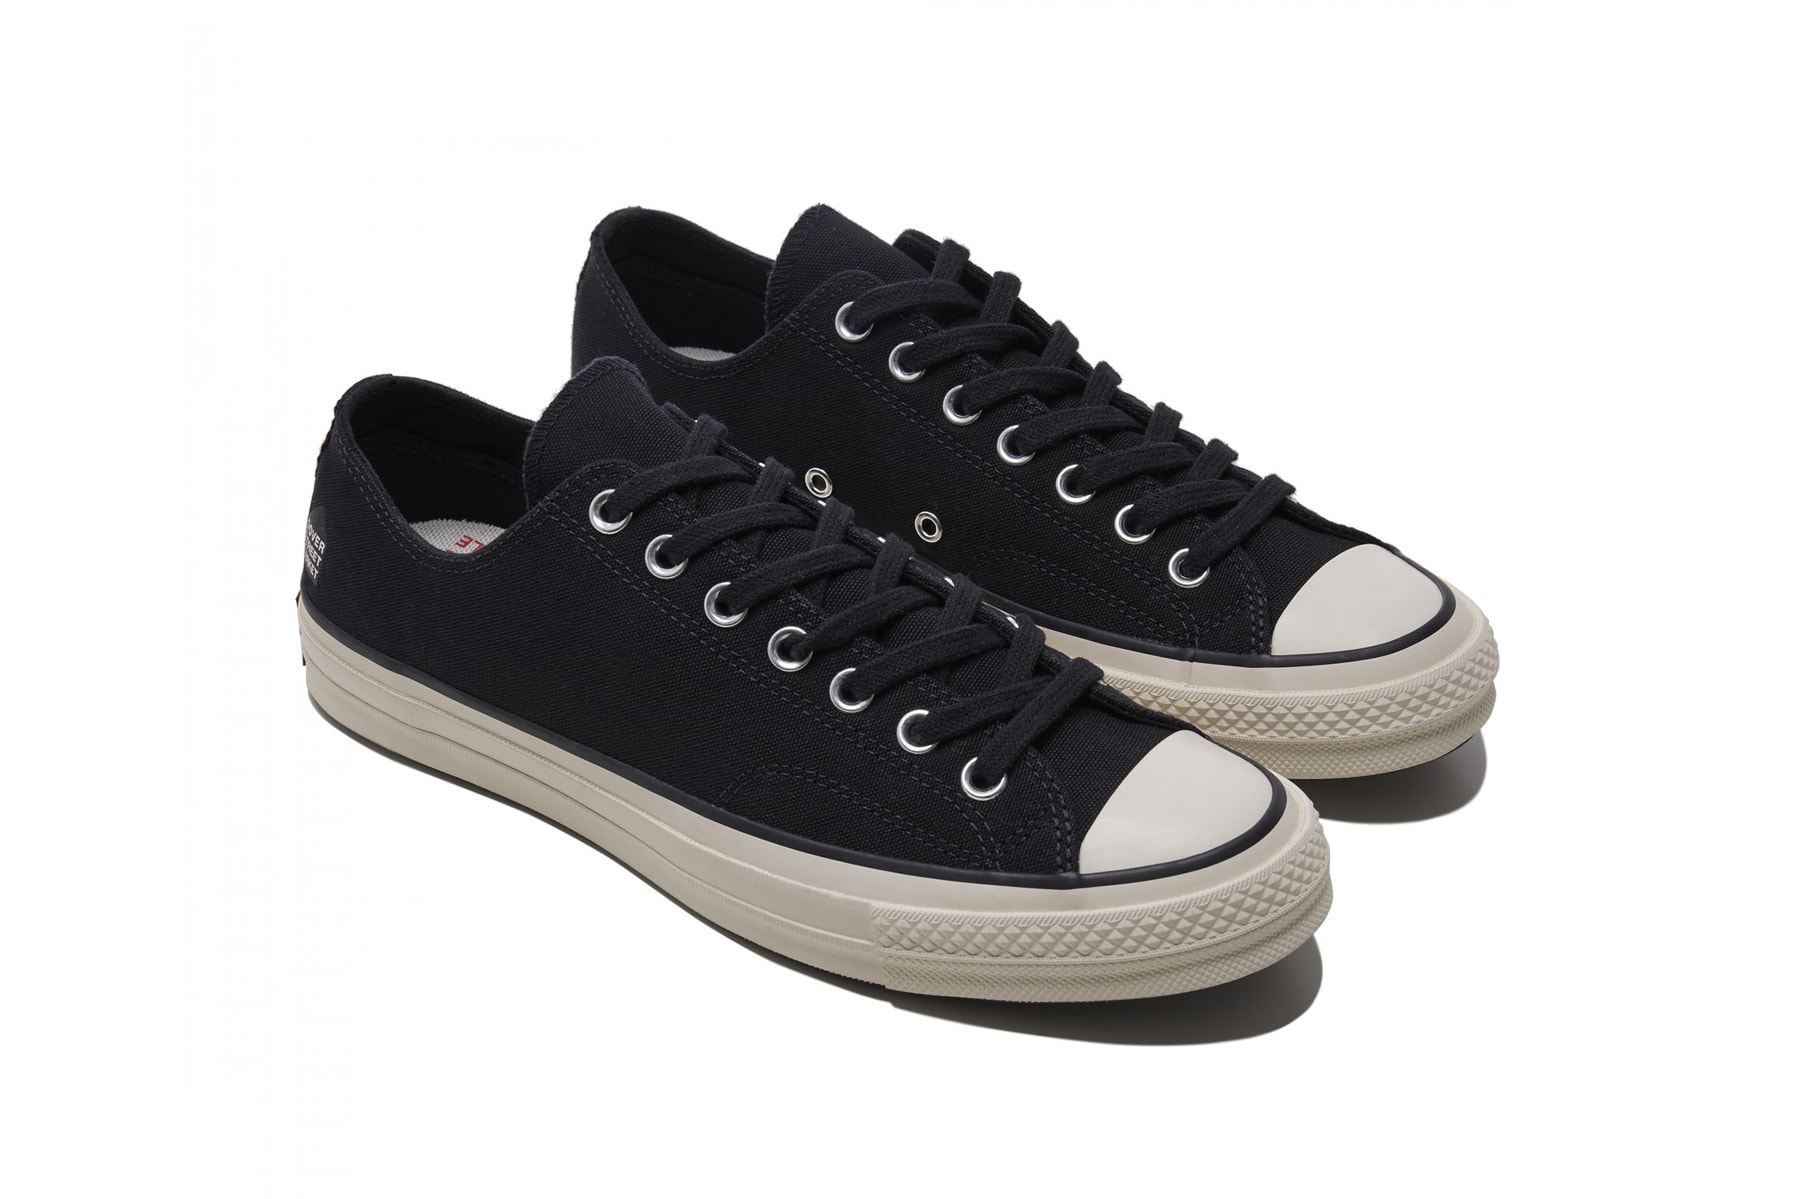 DSM Converse Chuck Taylor All Star '70 Ox dover street market london singapore white black sneaker colorway release date price info online purchase